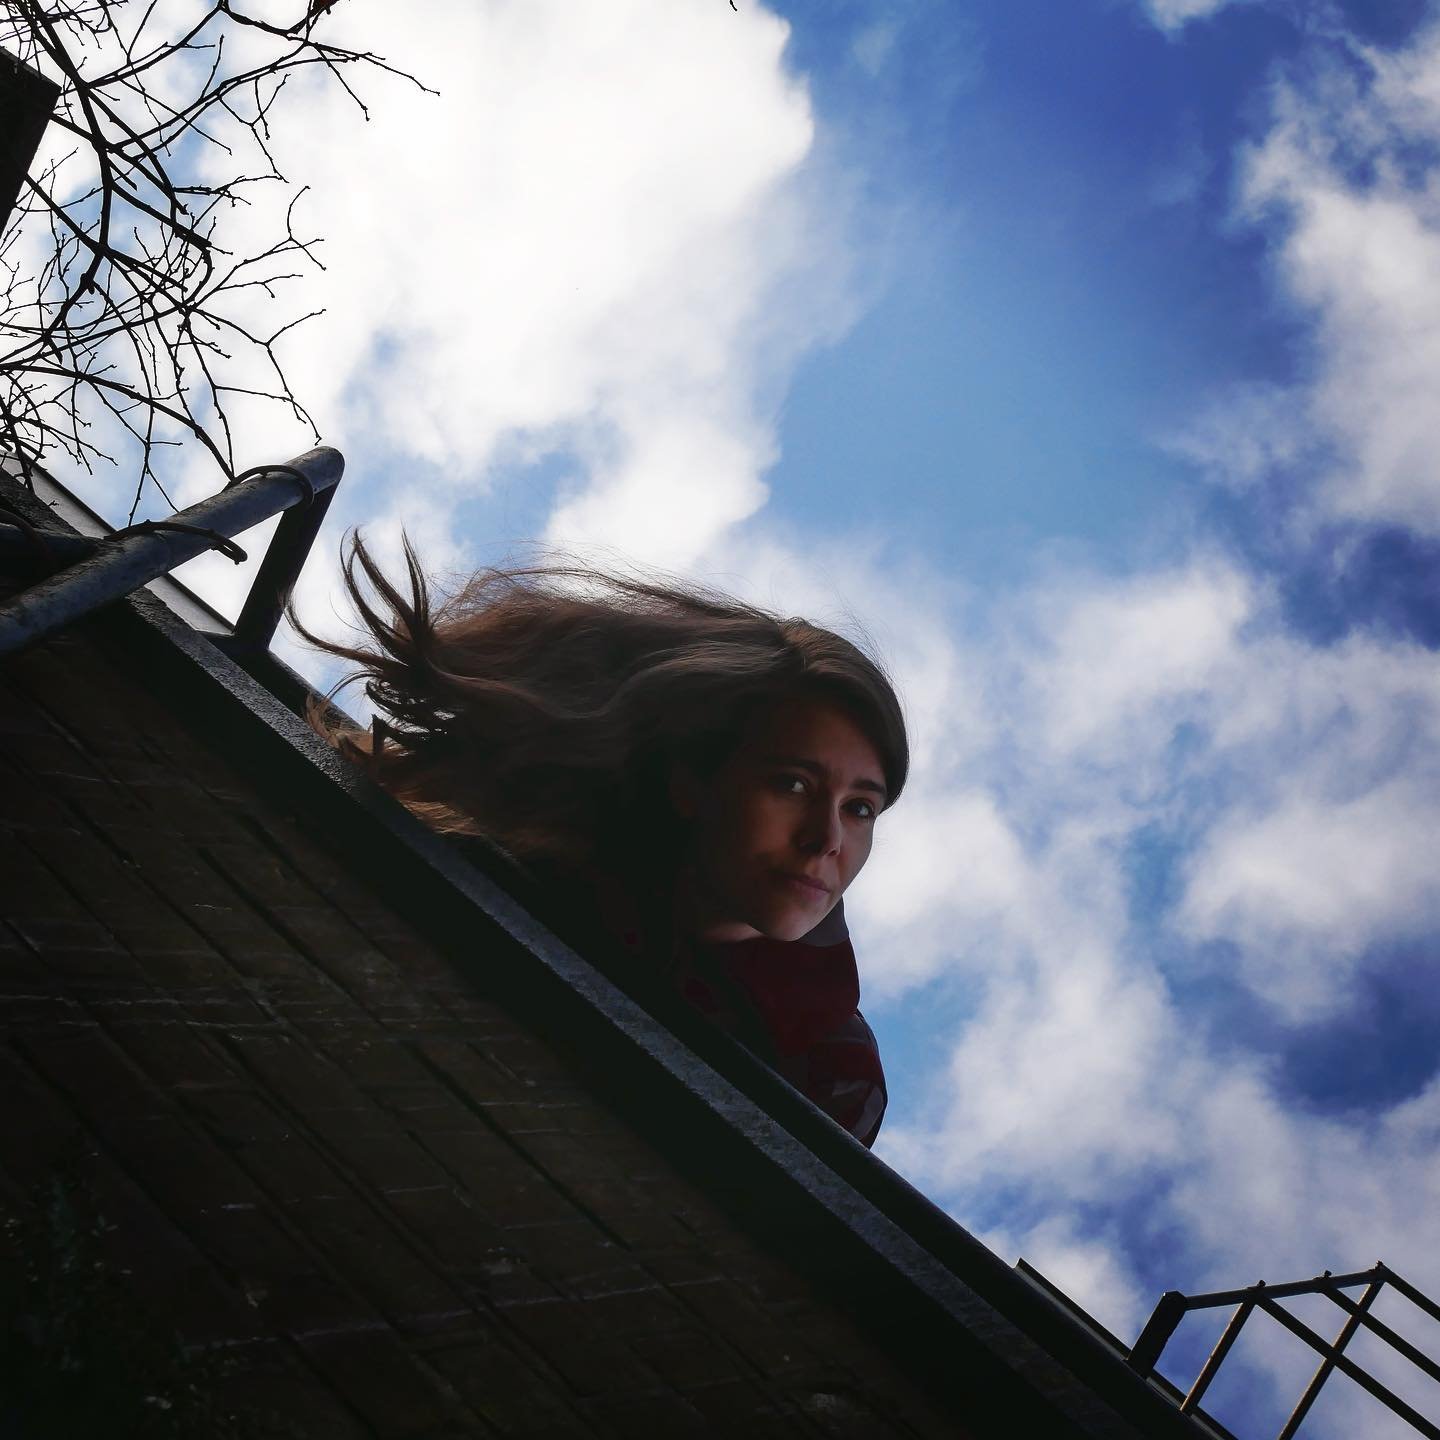 Been growing it in preparation off my Big Escape One Day... #rapunzel #housebound #mecfs #chronicillness #longhair #stuckinatower #millionsmissing [ID: person hanging her long brown hair down the balcony with above a bright blue cloudy sky]